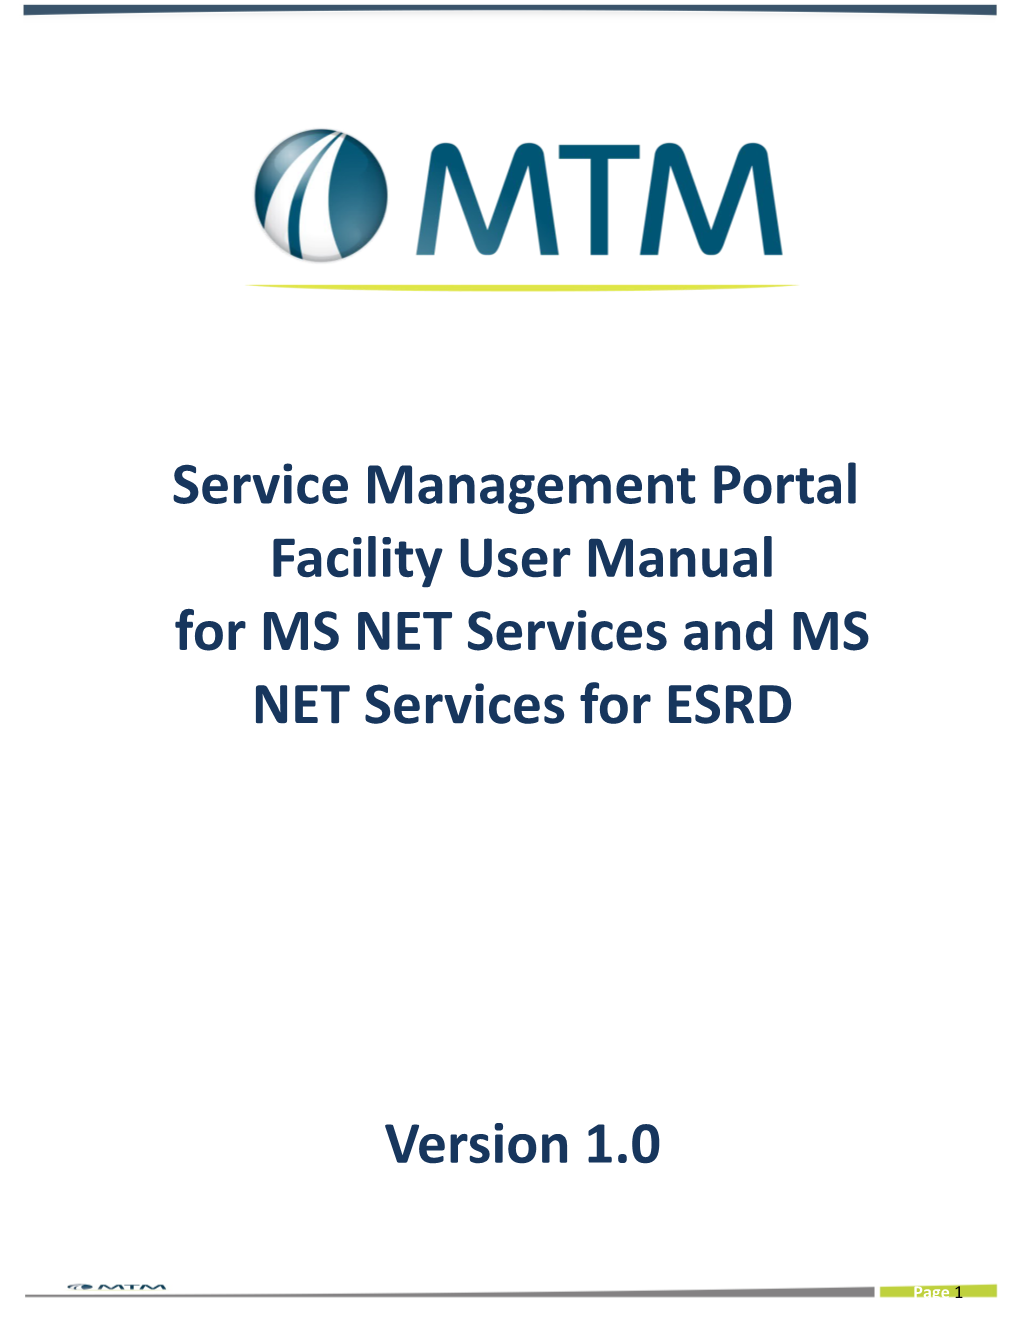 For MS NET Services and MS NET Services for ESRD